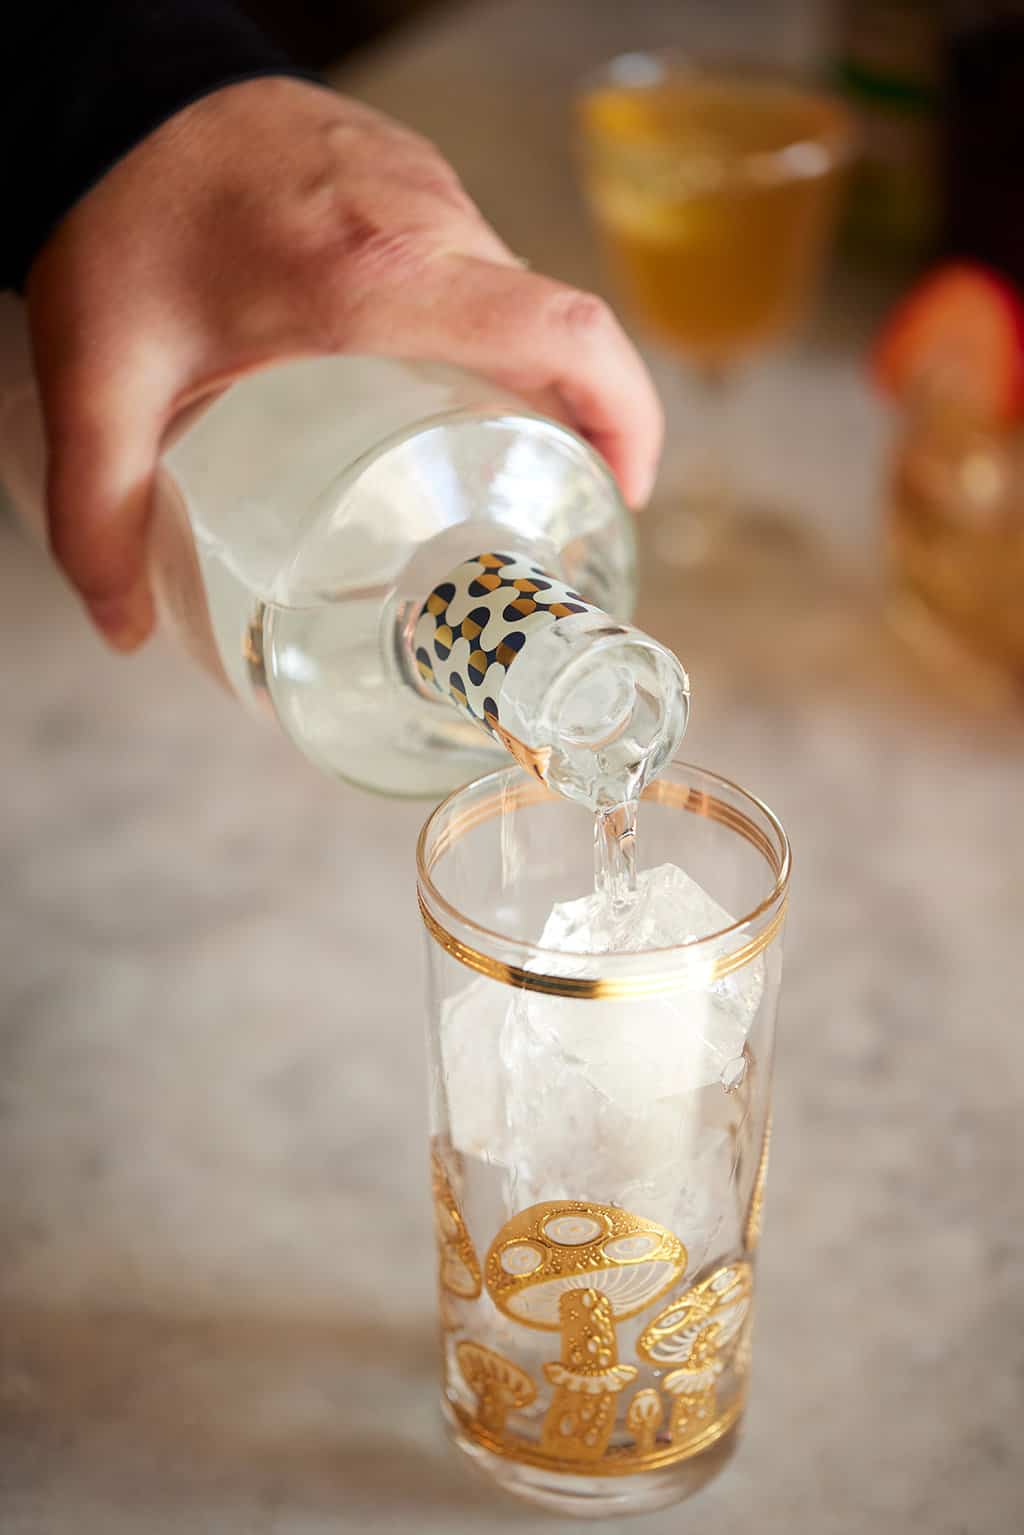 Jubilee low-alcohol gin cocktail recipe